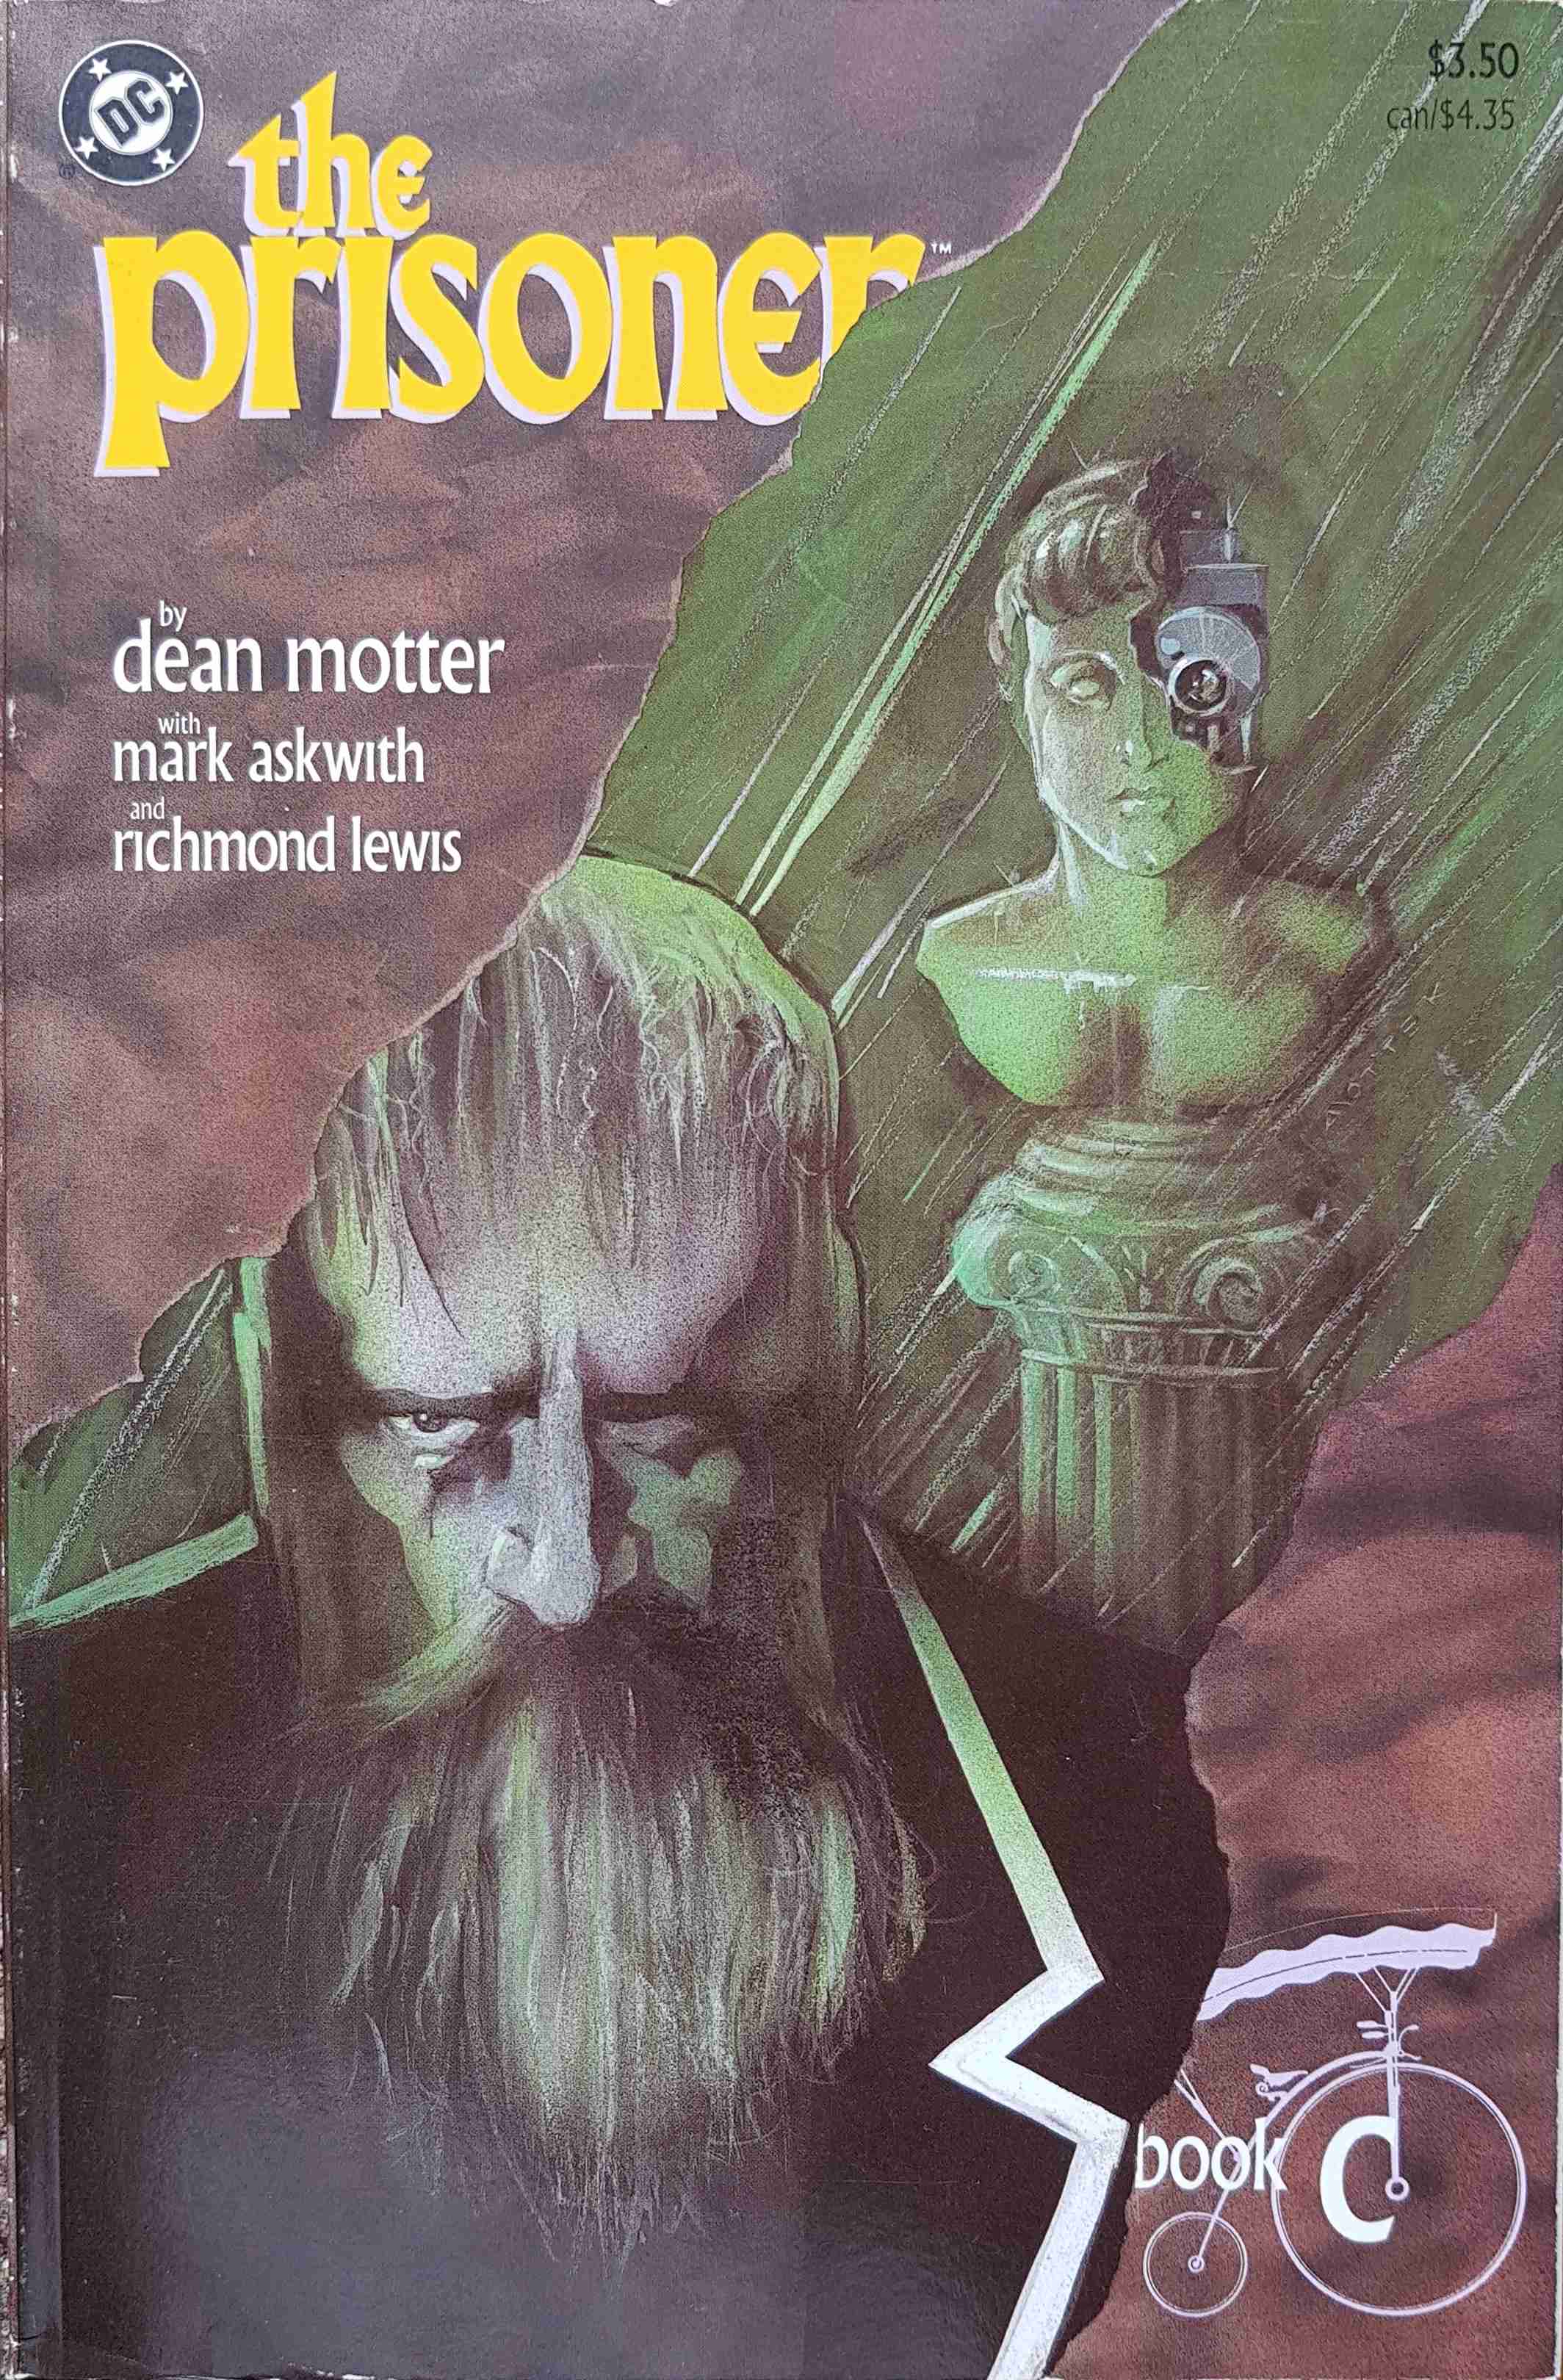 Picture of The prisoner - Graphic novel book c by artist Unknown from ITV, Channel 4 and Channel 5 books library